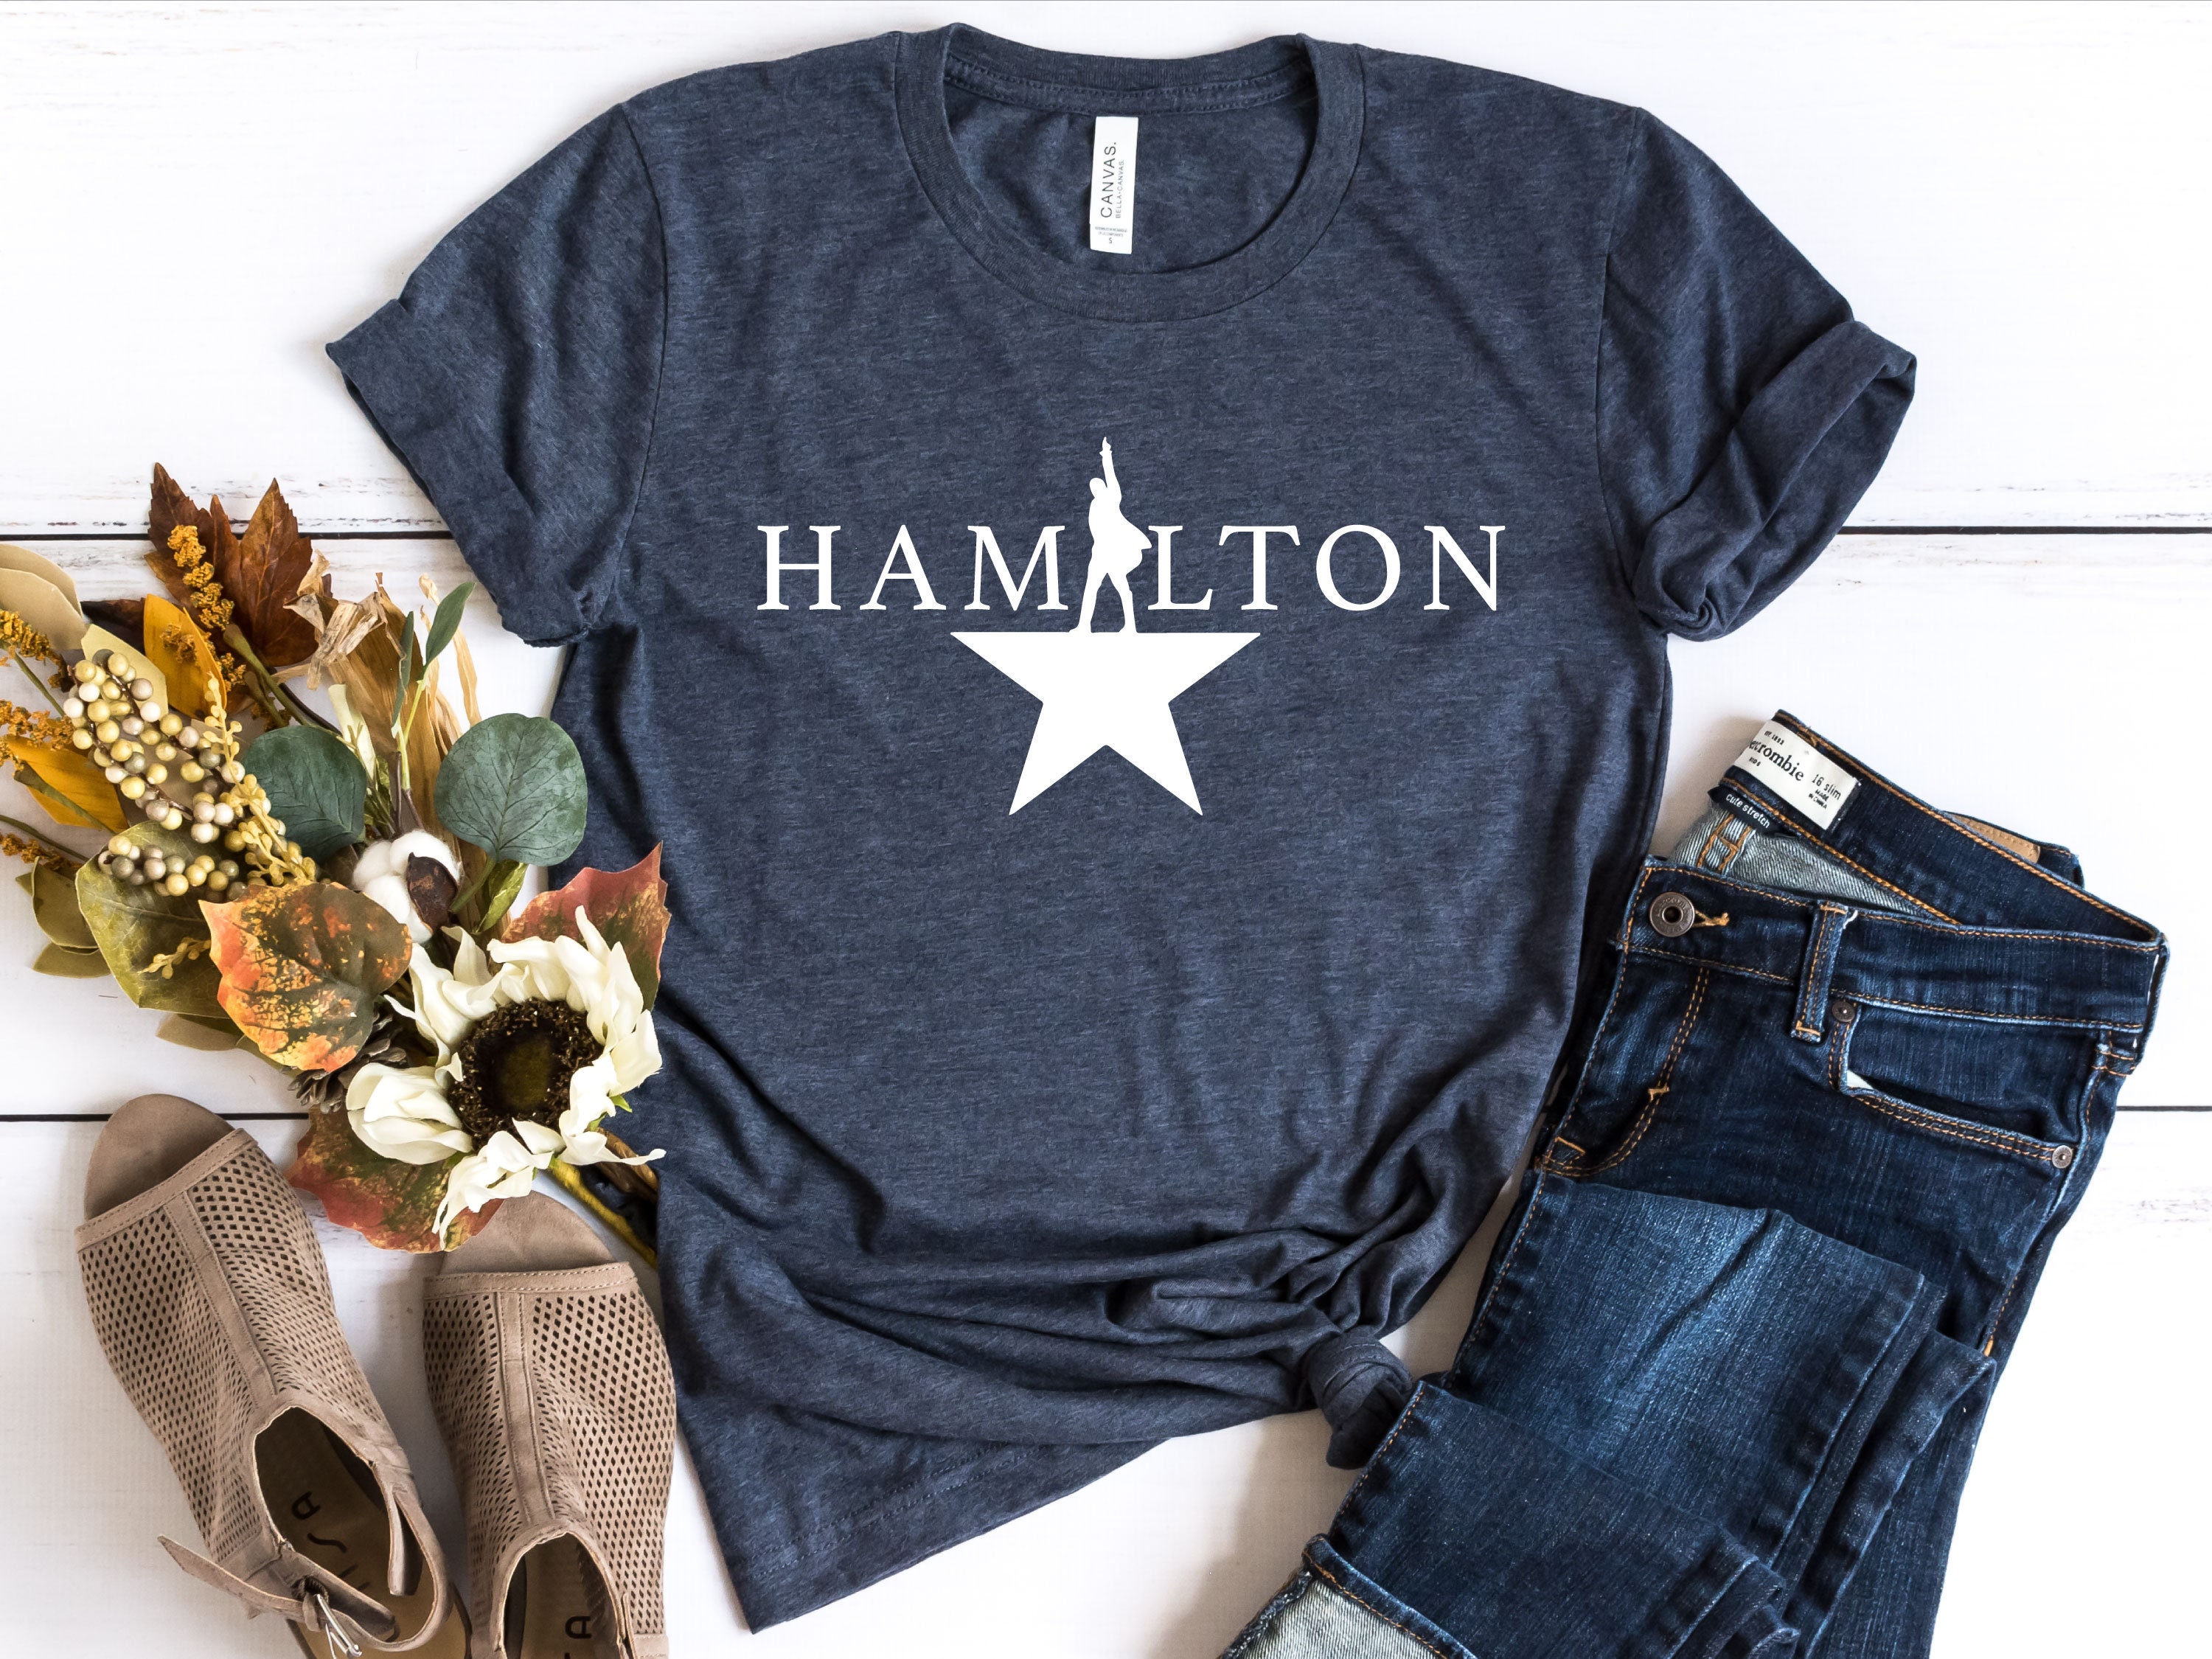 Powerline Hamilton Themed T-shirts Black, White, Colorful T-shirts Heat  Press and Airbrush Shirts Customized Gifts 